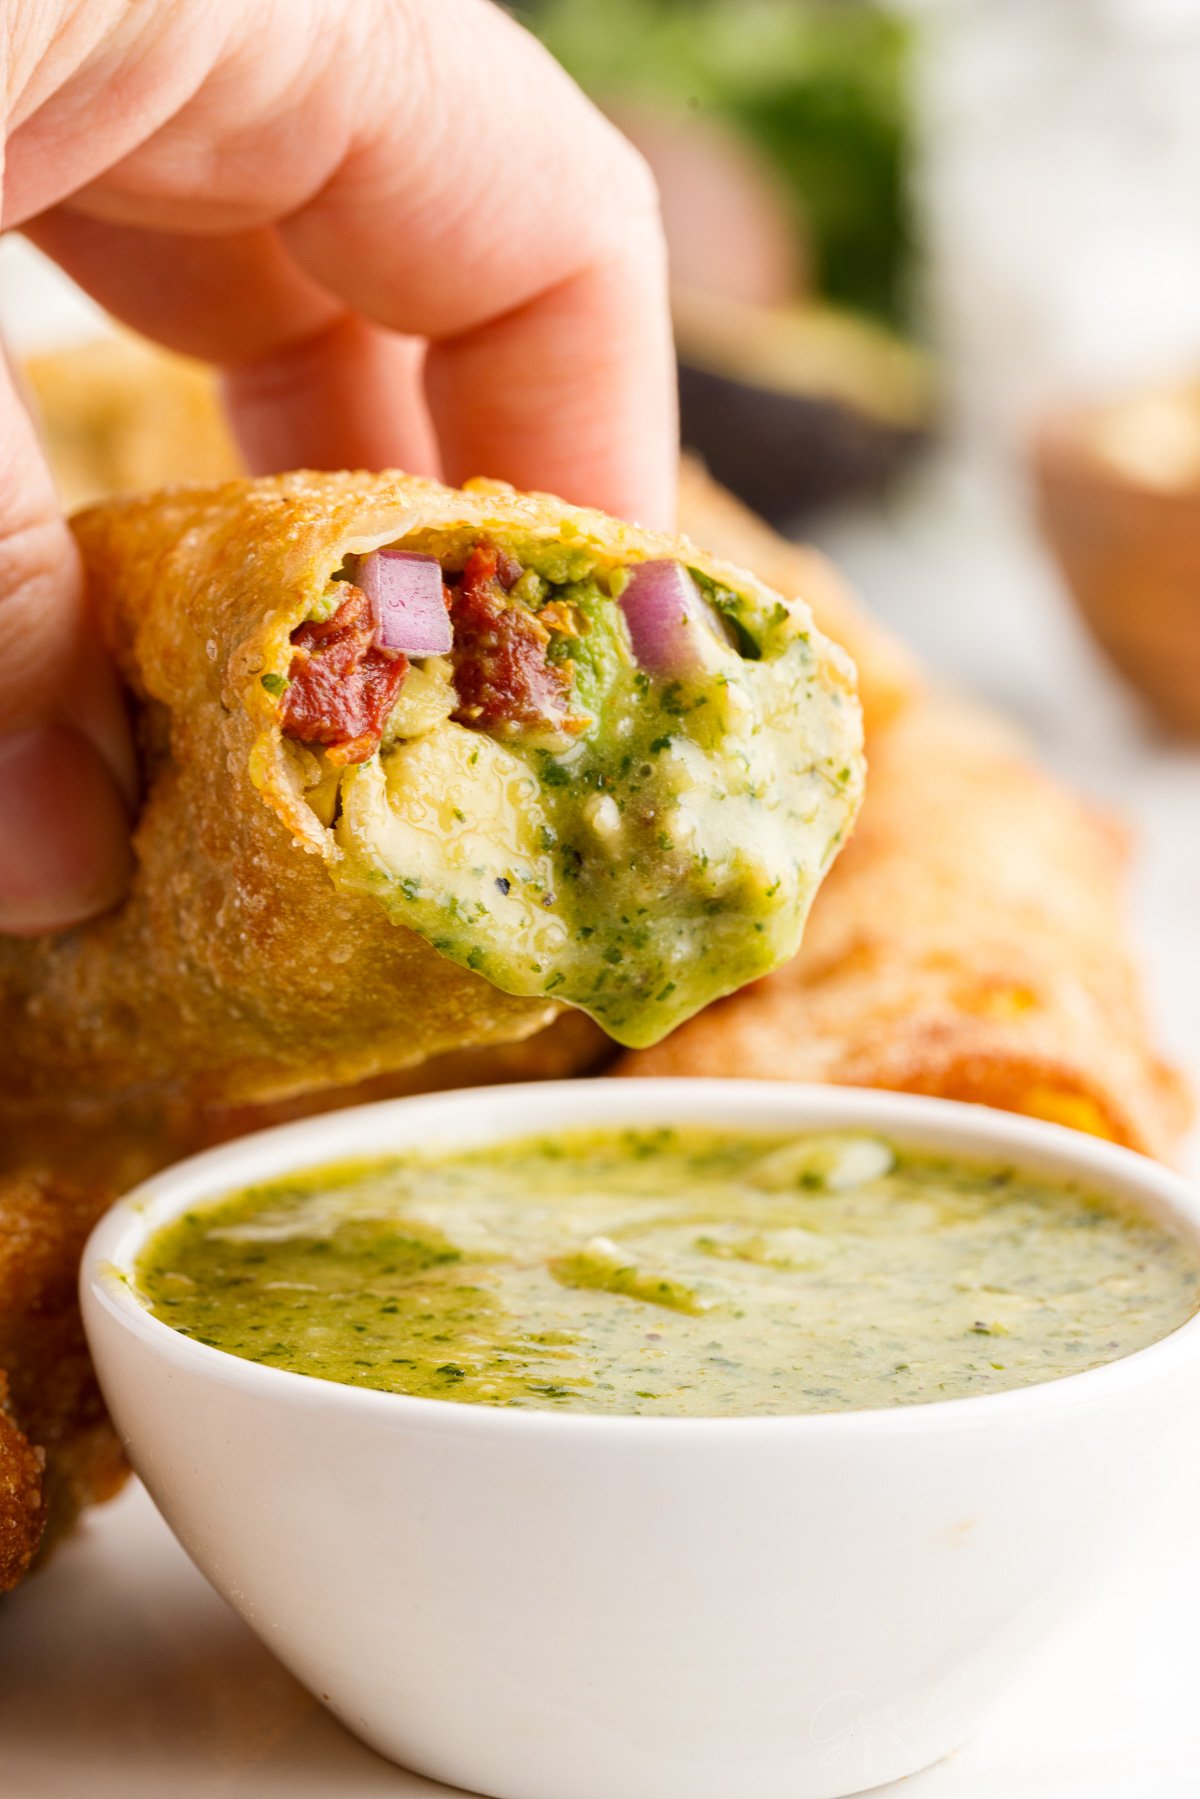 Cheesecake Factory Avocado Egg Rolls dipped in sauce.